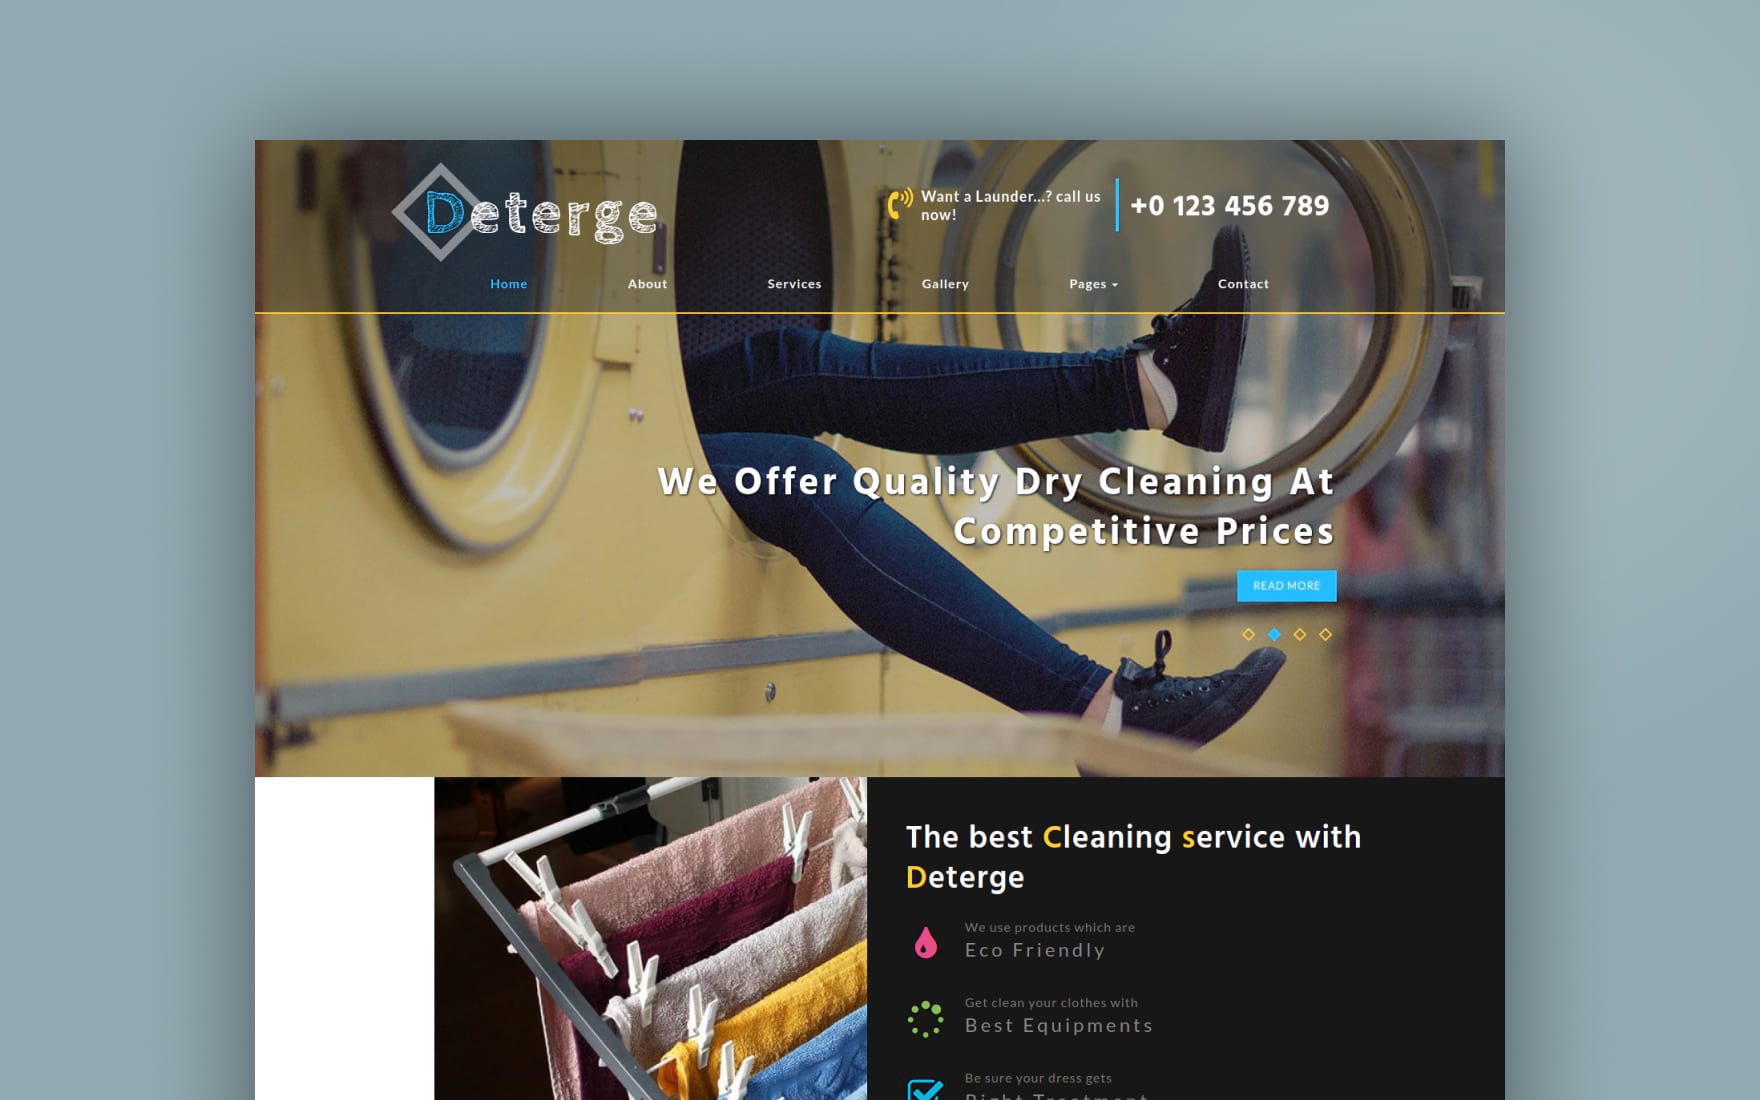 deterge a laundry website template